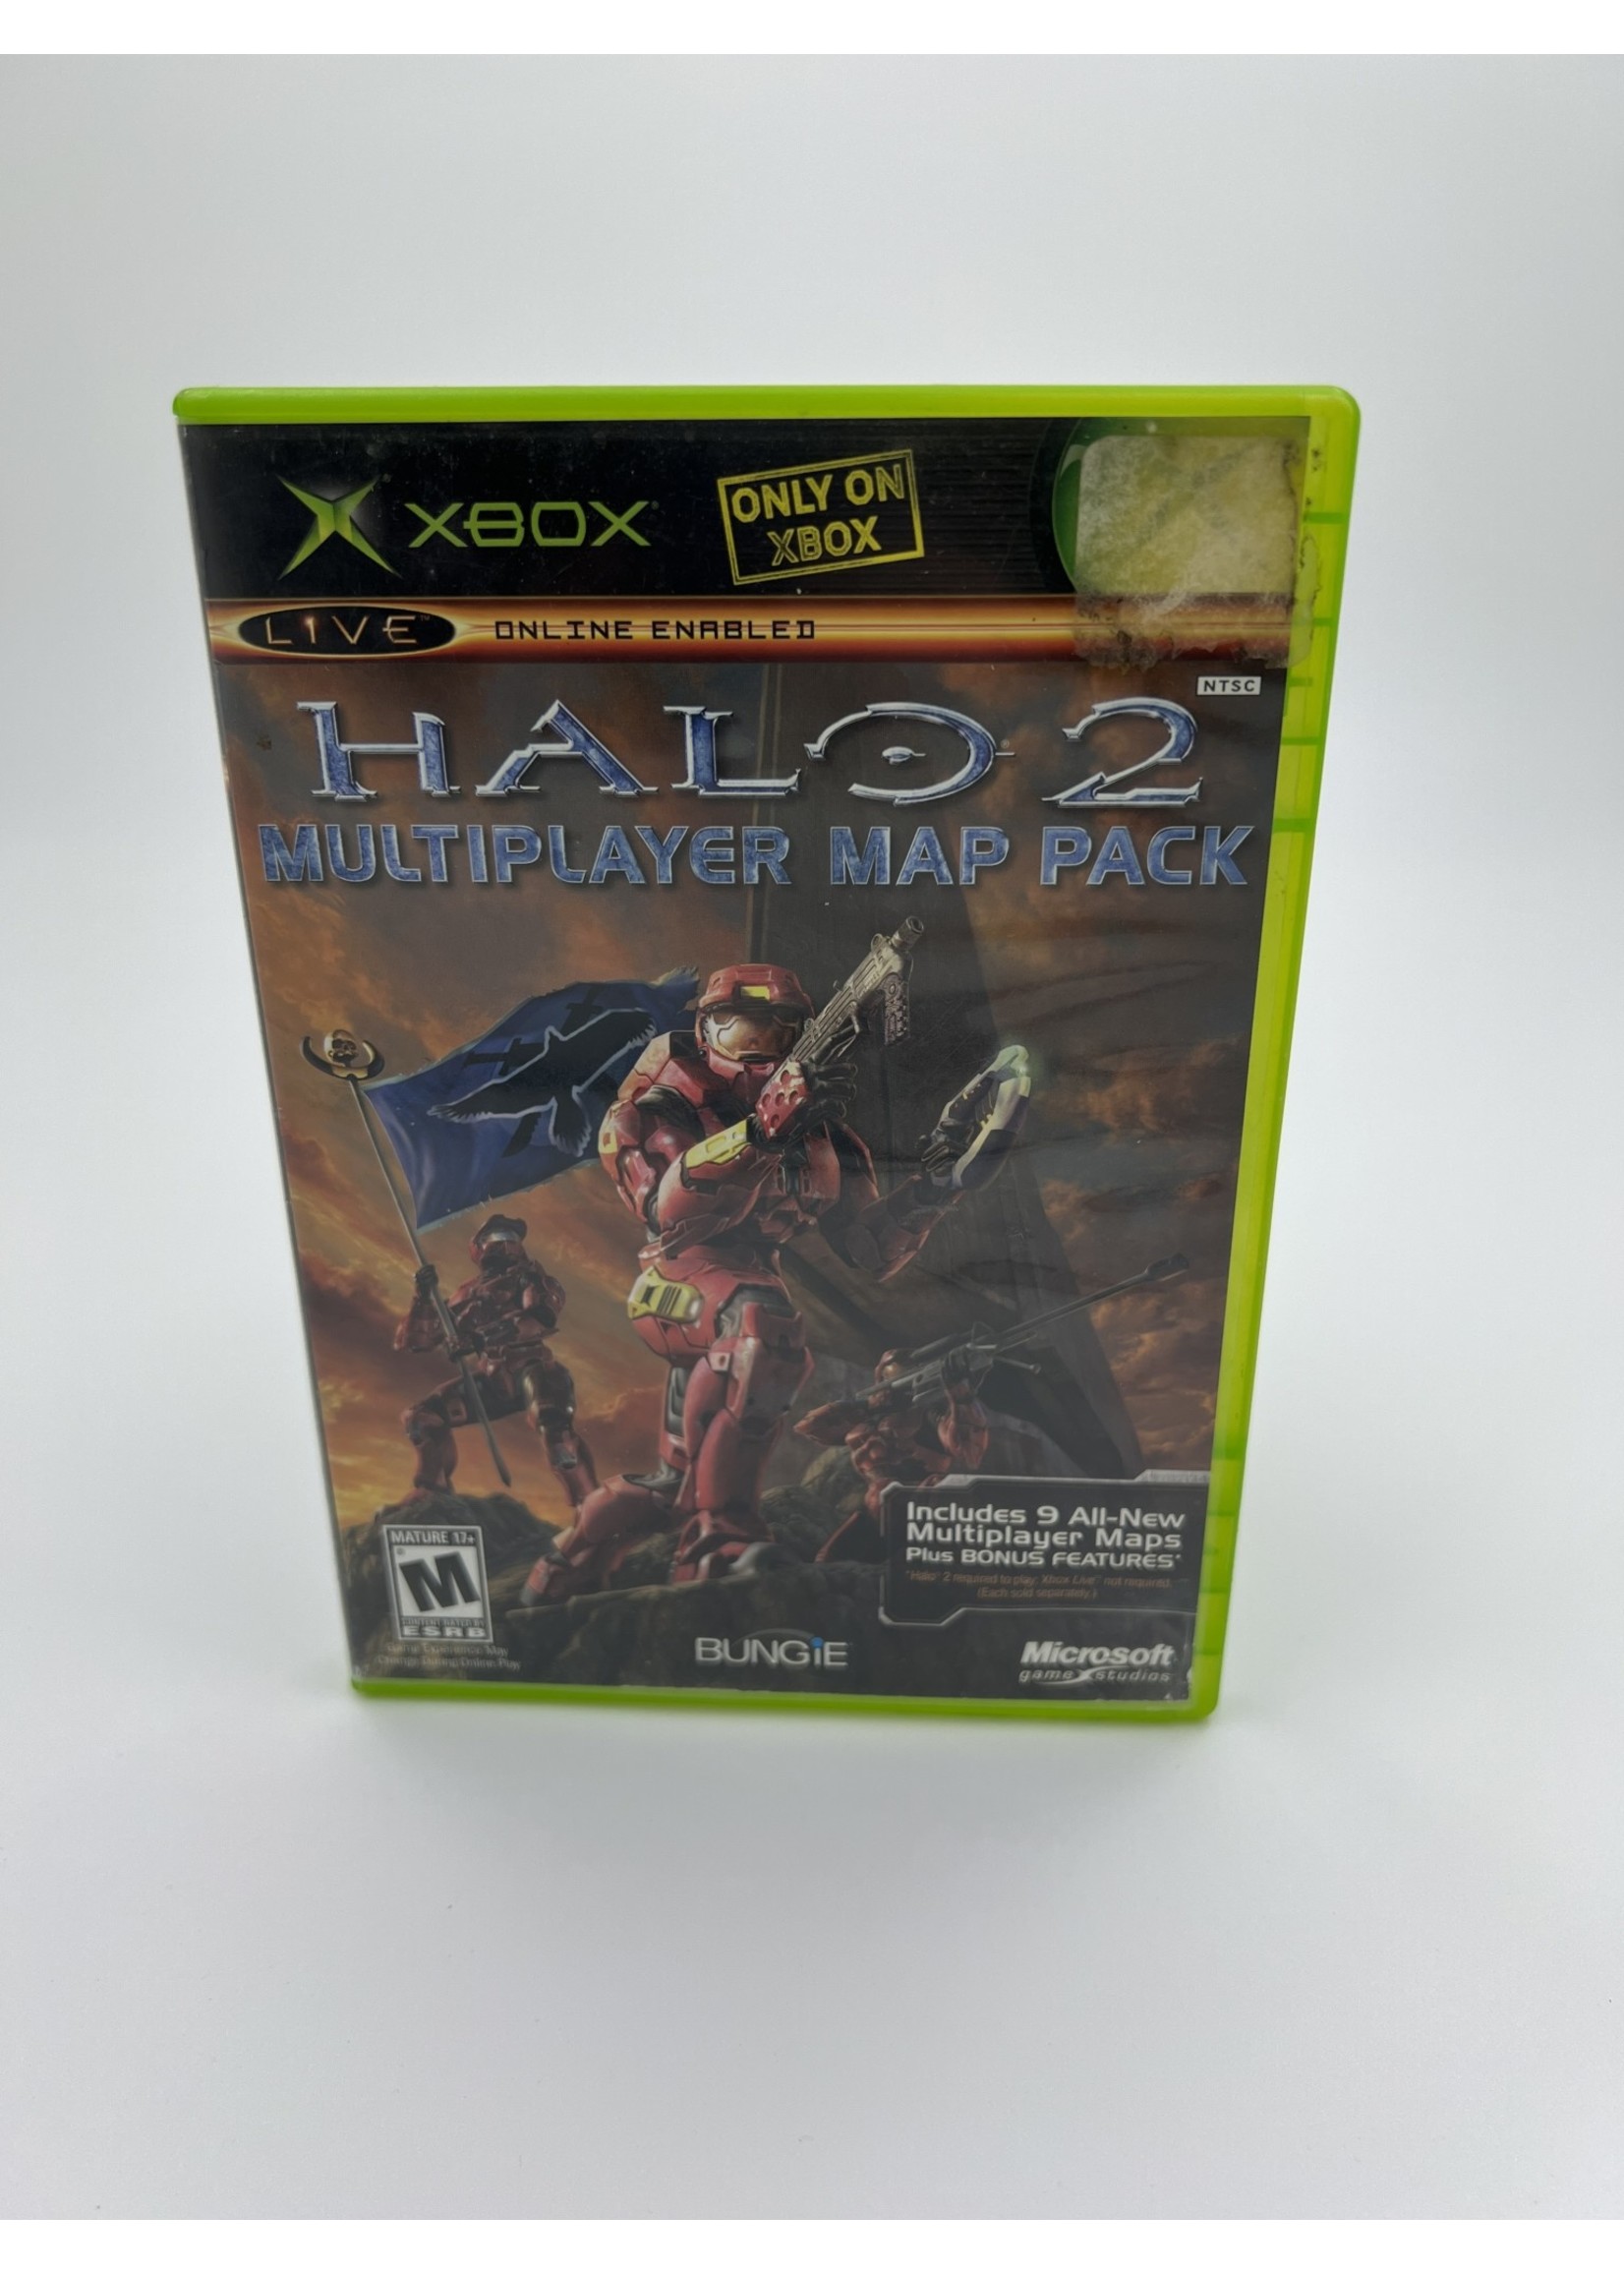 Xbox Halo 2 Multiplayer Map Pack Xbox